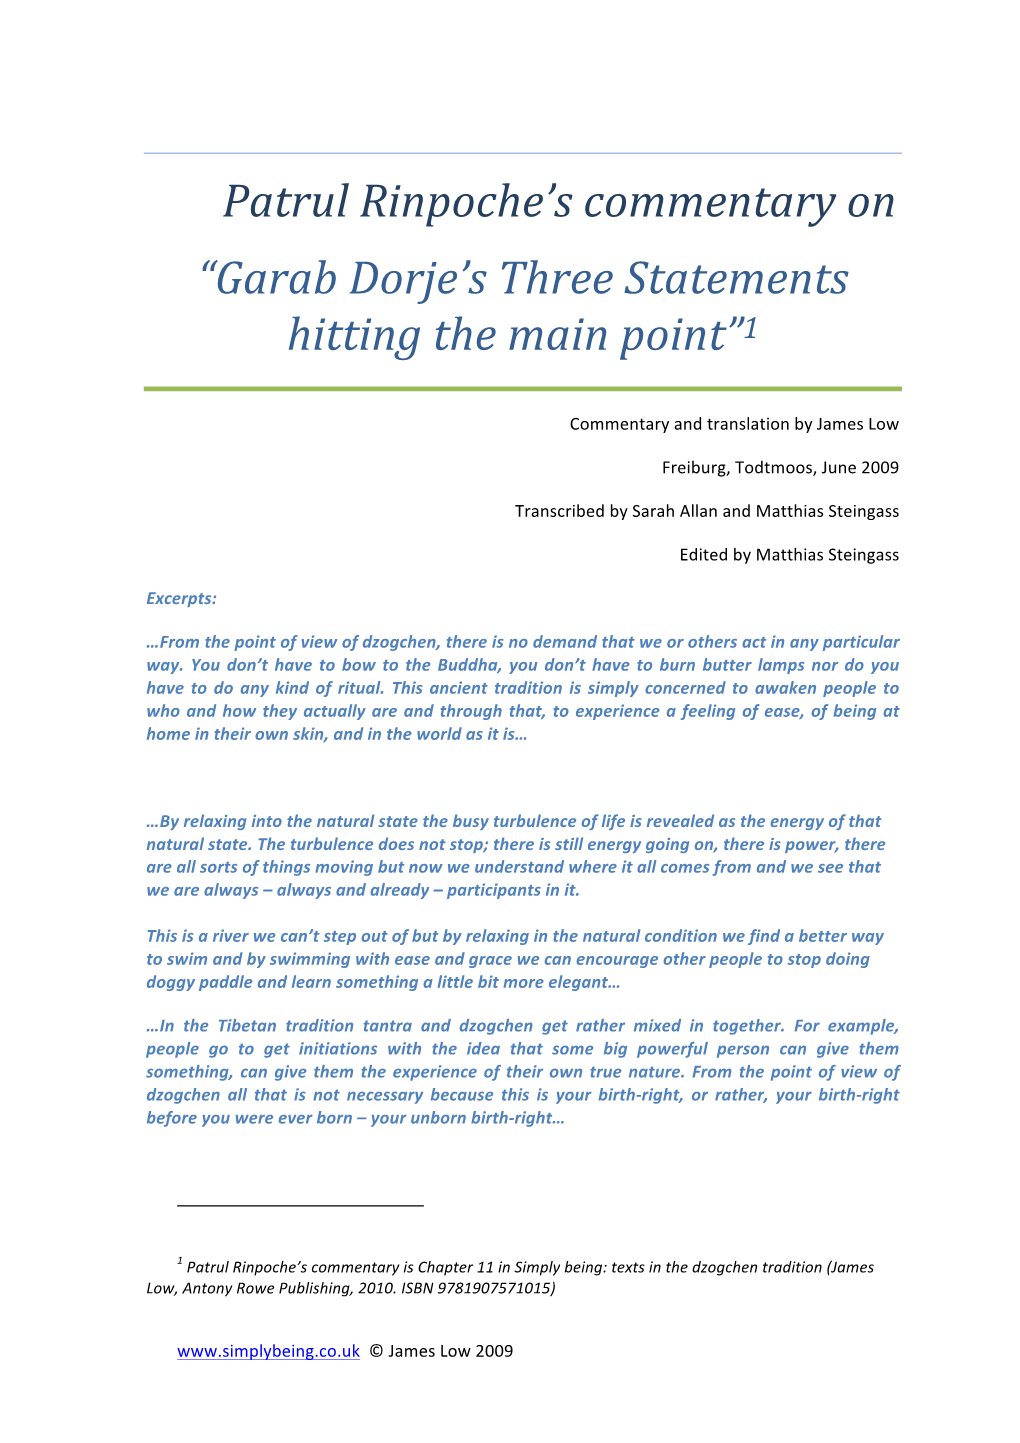 Patrul Rinpoche's Commentary on “Garab Dorje's Three Statements Hitting the Main Point”